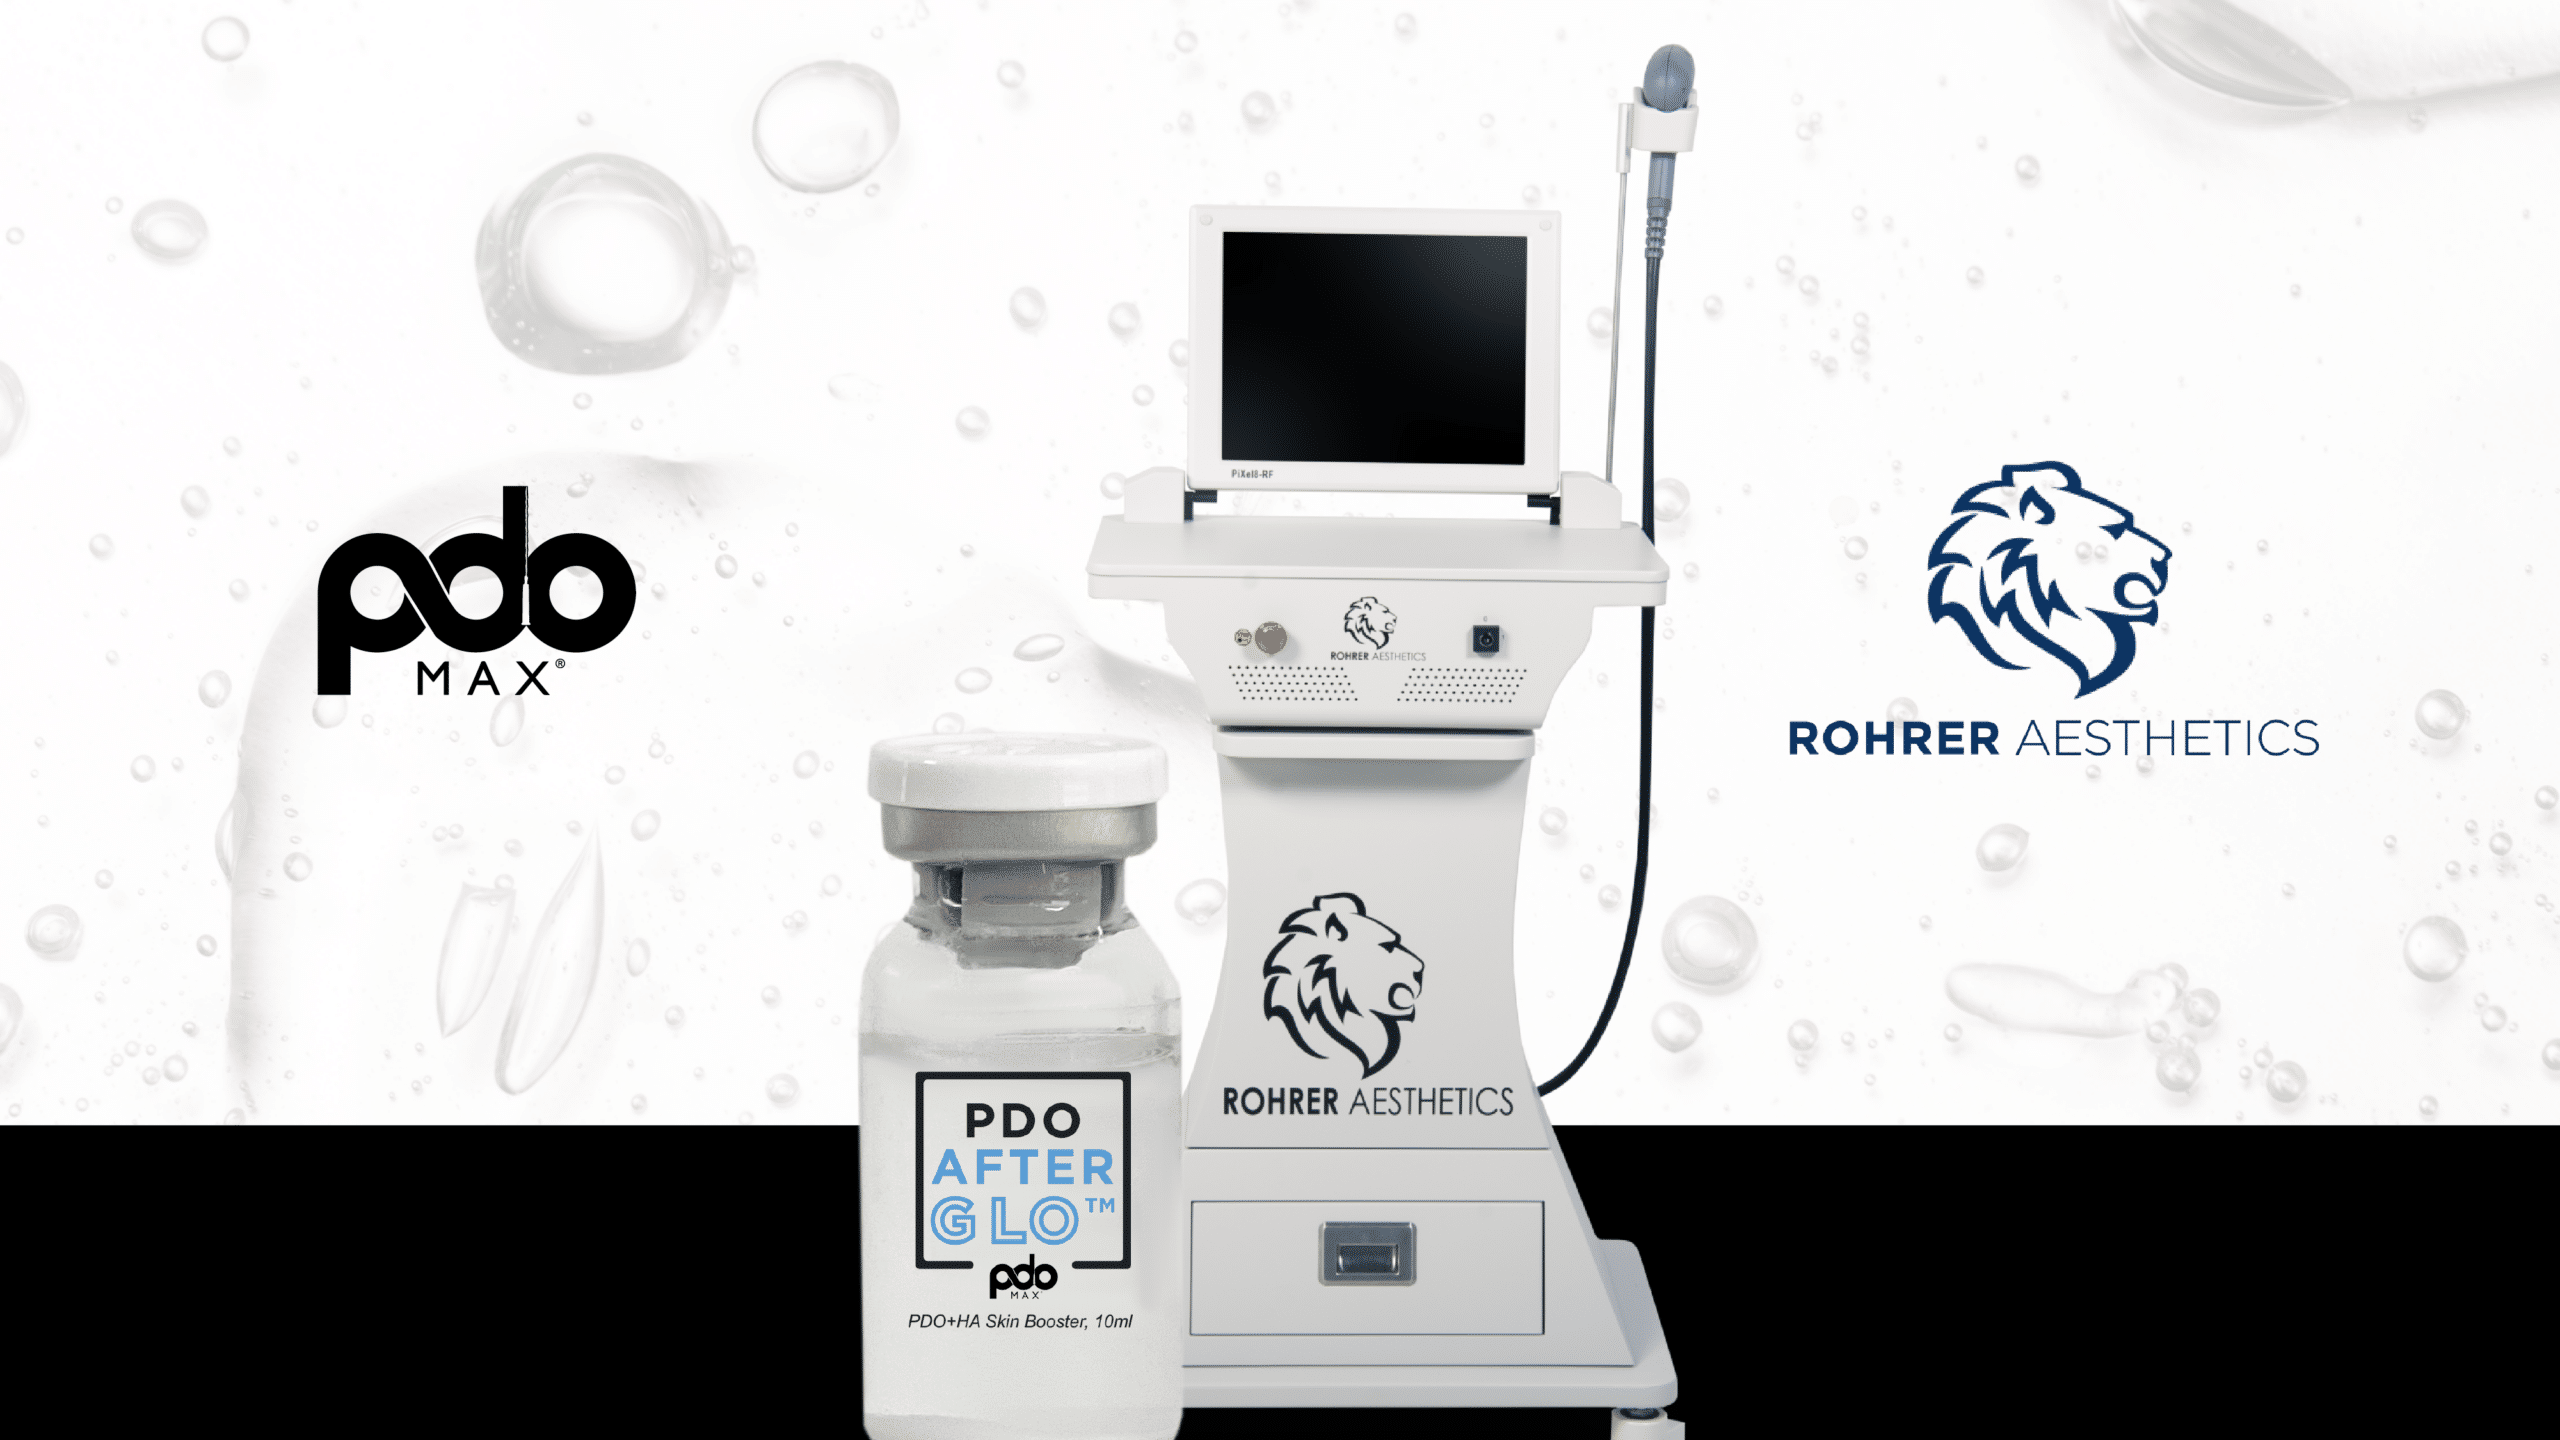 PDO Max and Rohrer Aesthetics Team Up to Offer PDO AfterGlo, the